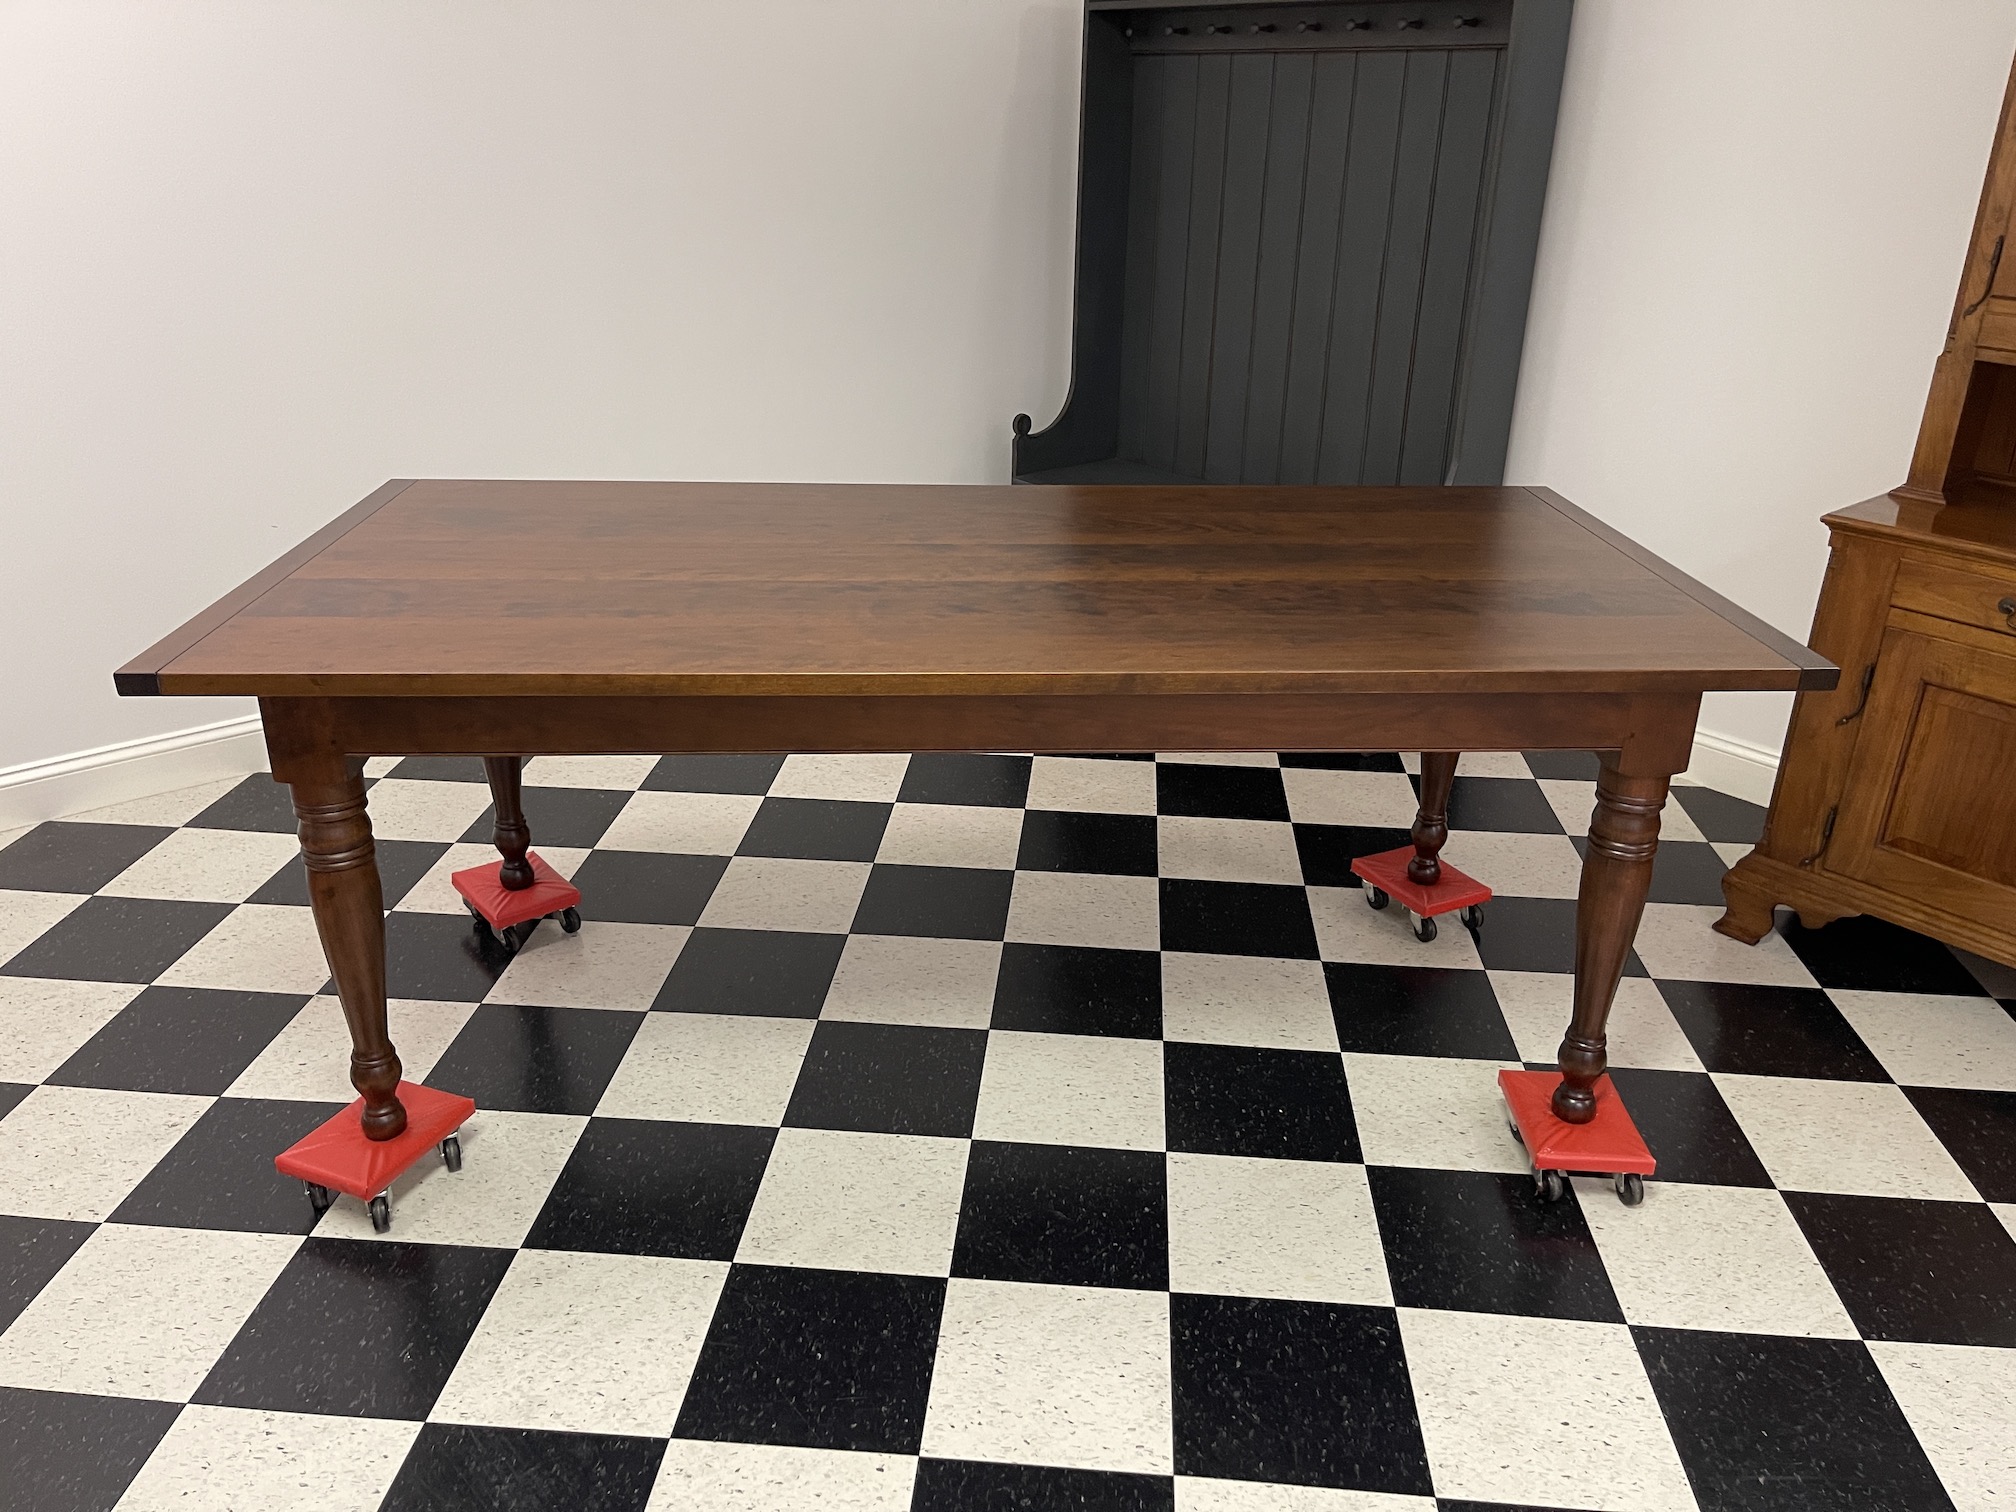 7ft X 40in Cherry Wood Table New Model Image